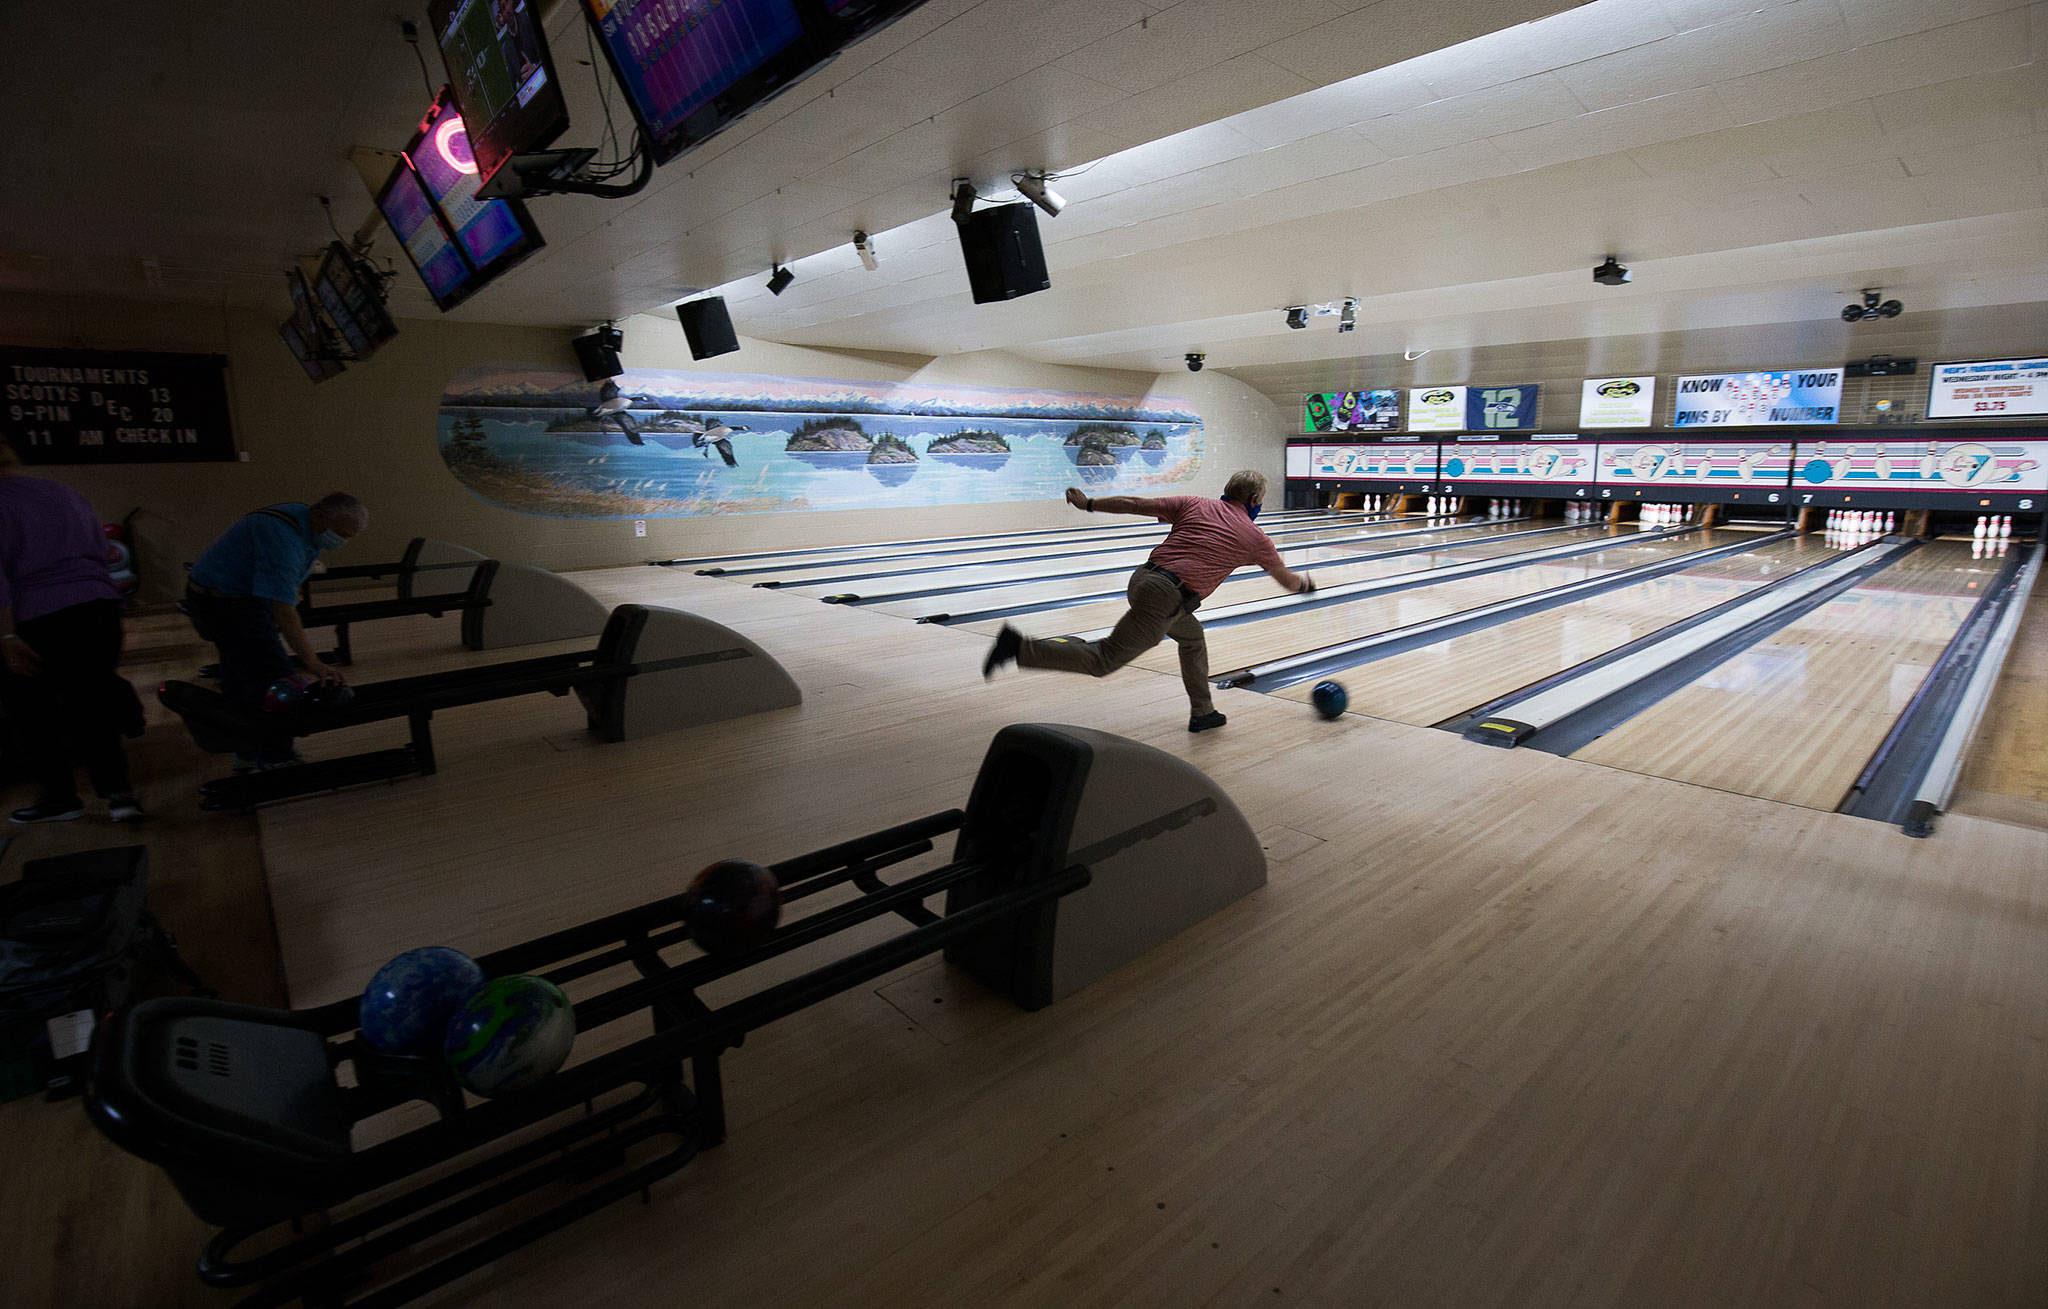 Dennis Shewey, of Arlington, bowls at Evergreen Lanes on Monday in Everett. Starting Monday, certain categories of Snohomish county businesses were permitted to reinstate indoor occupancy at 25% capacity under Phase 2 of Gov. Jay Inslee’s statewide reopening plan. (Andy Bronson / The Herald)